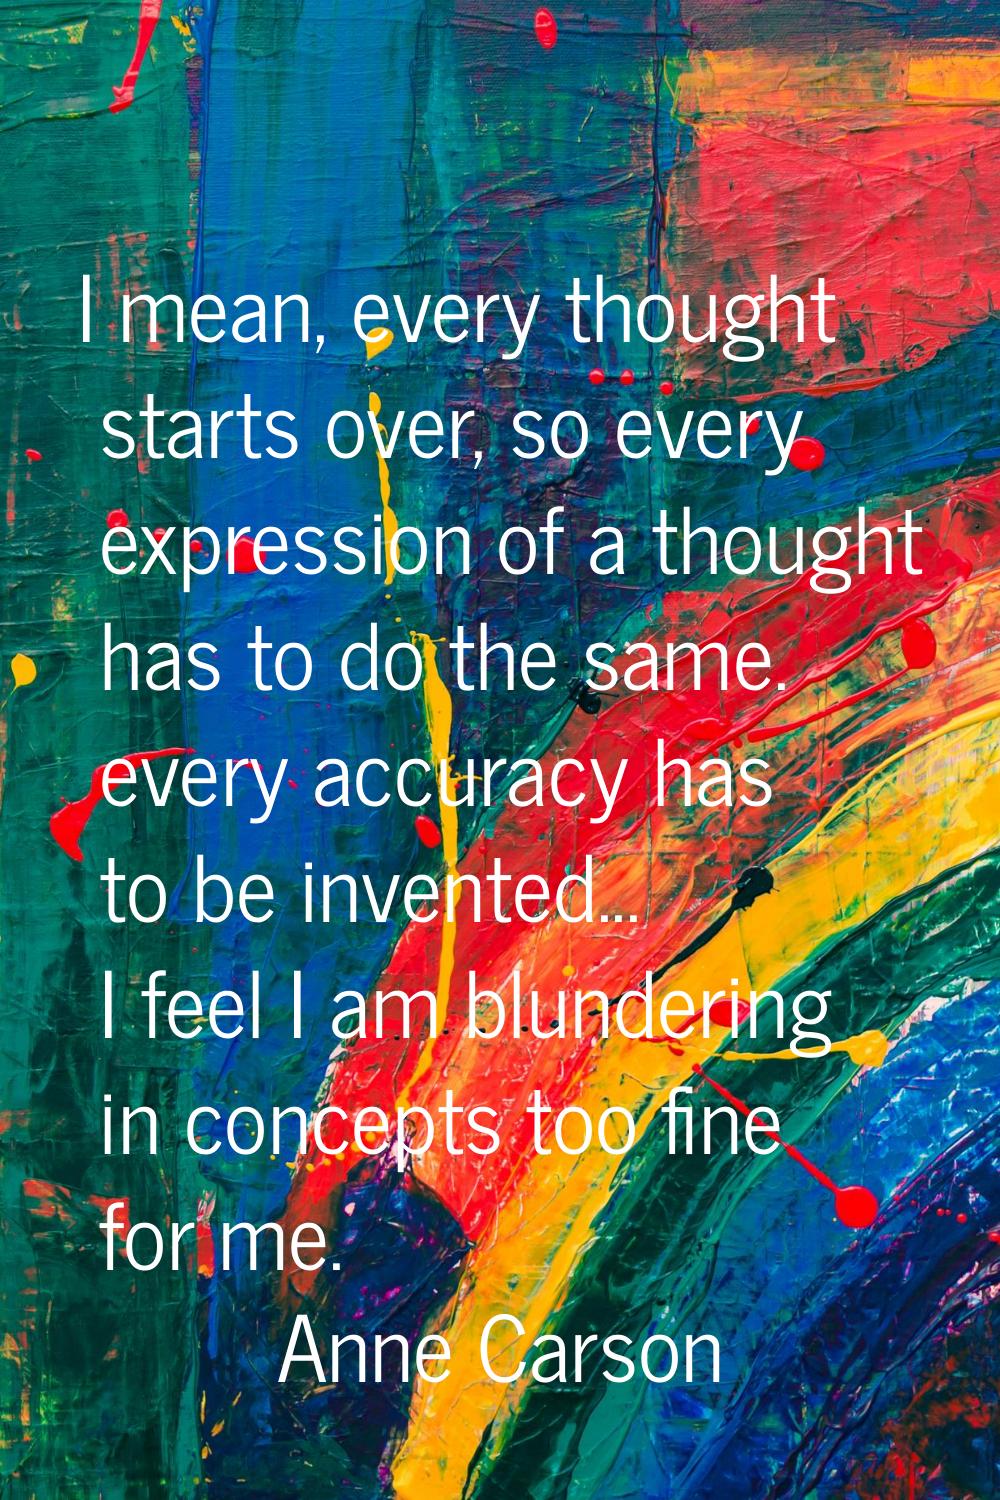 I mean, every thought starts over, so every expression of a thought has to do the same. every accur